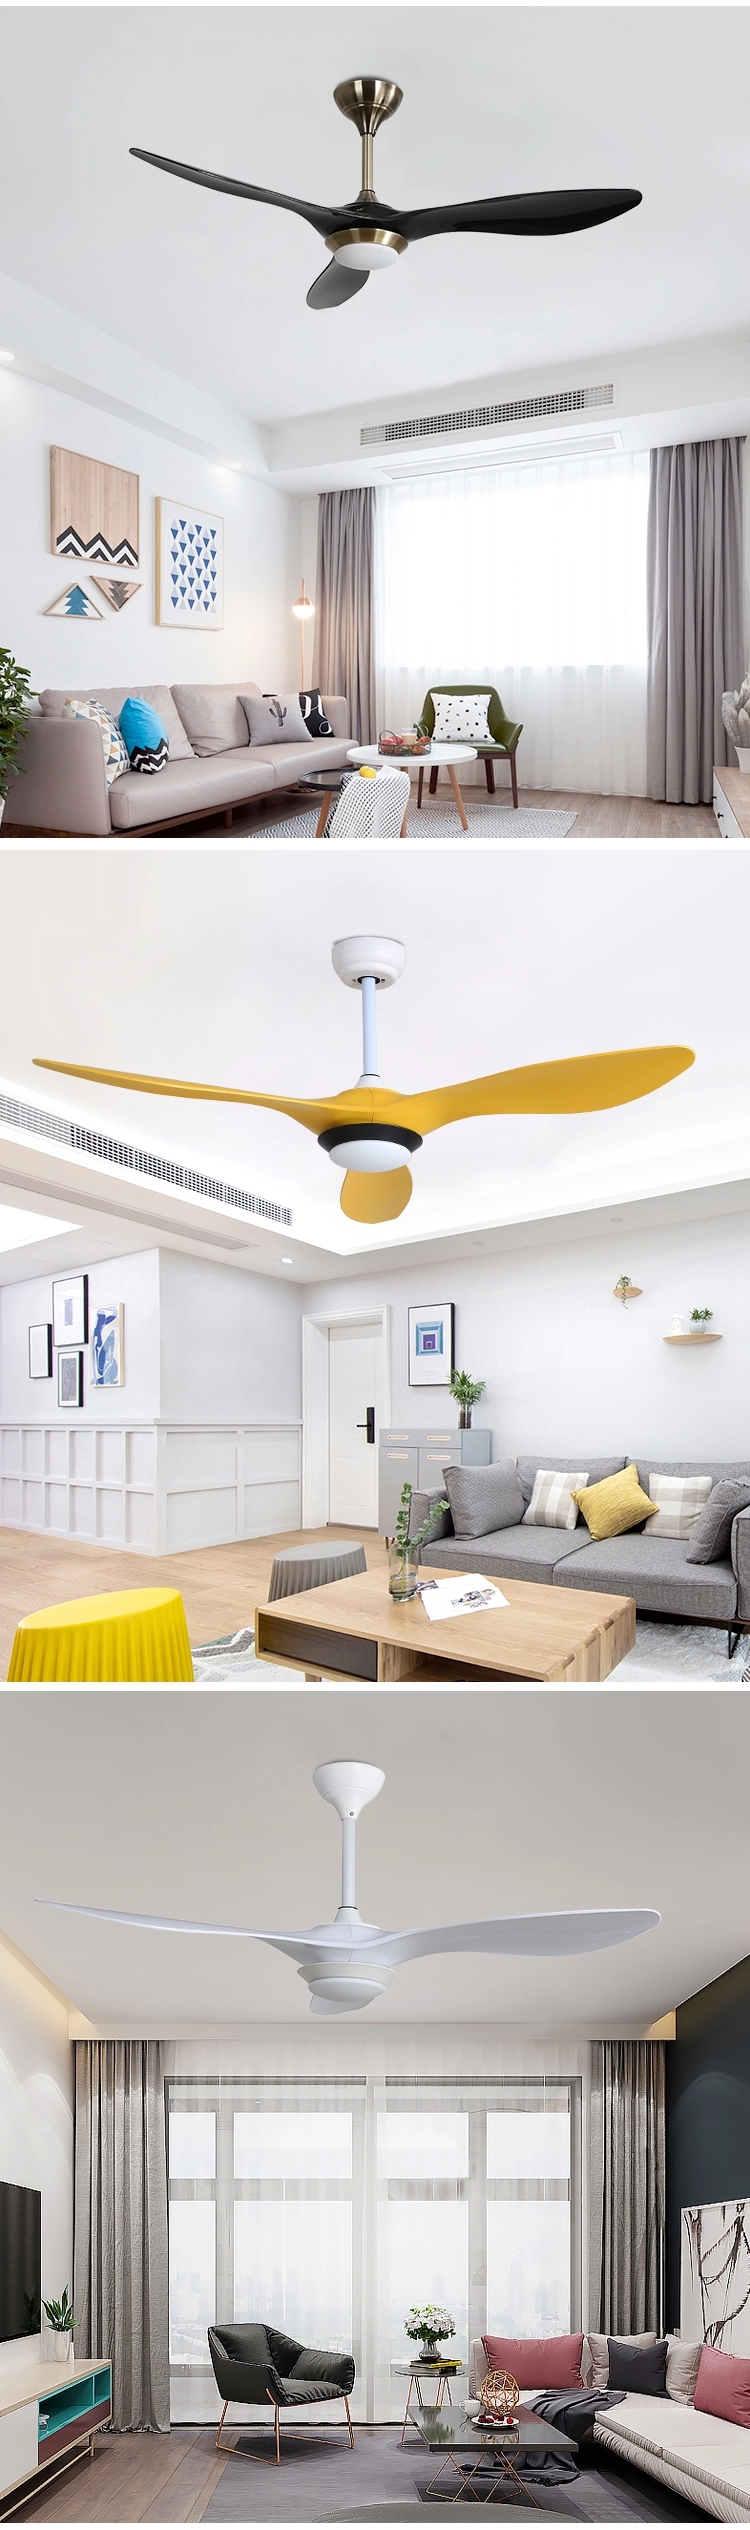 Distressed Yellow color ceiling fan